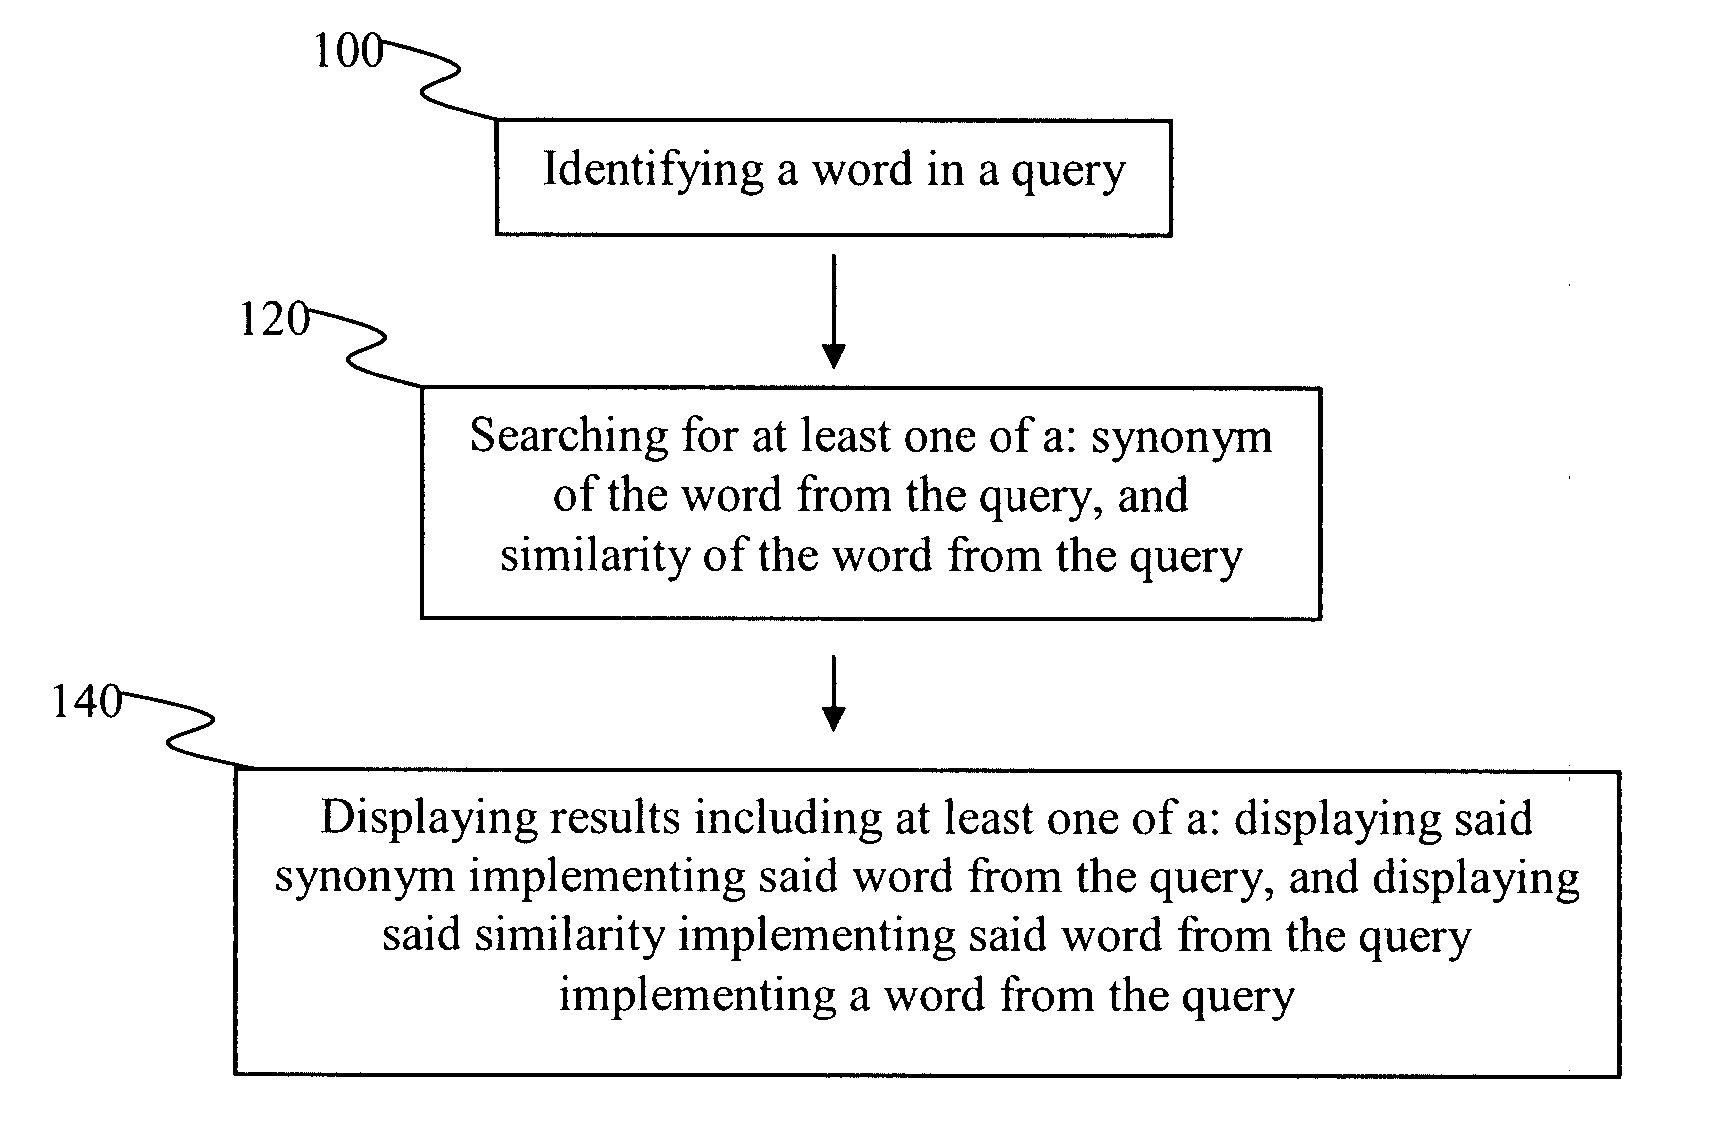 Methods for providing, displaying and suggesting results involving synonyms, similarities and others